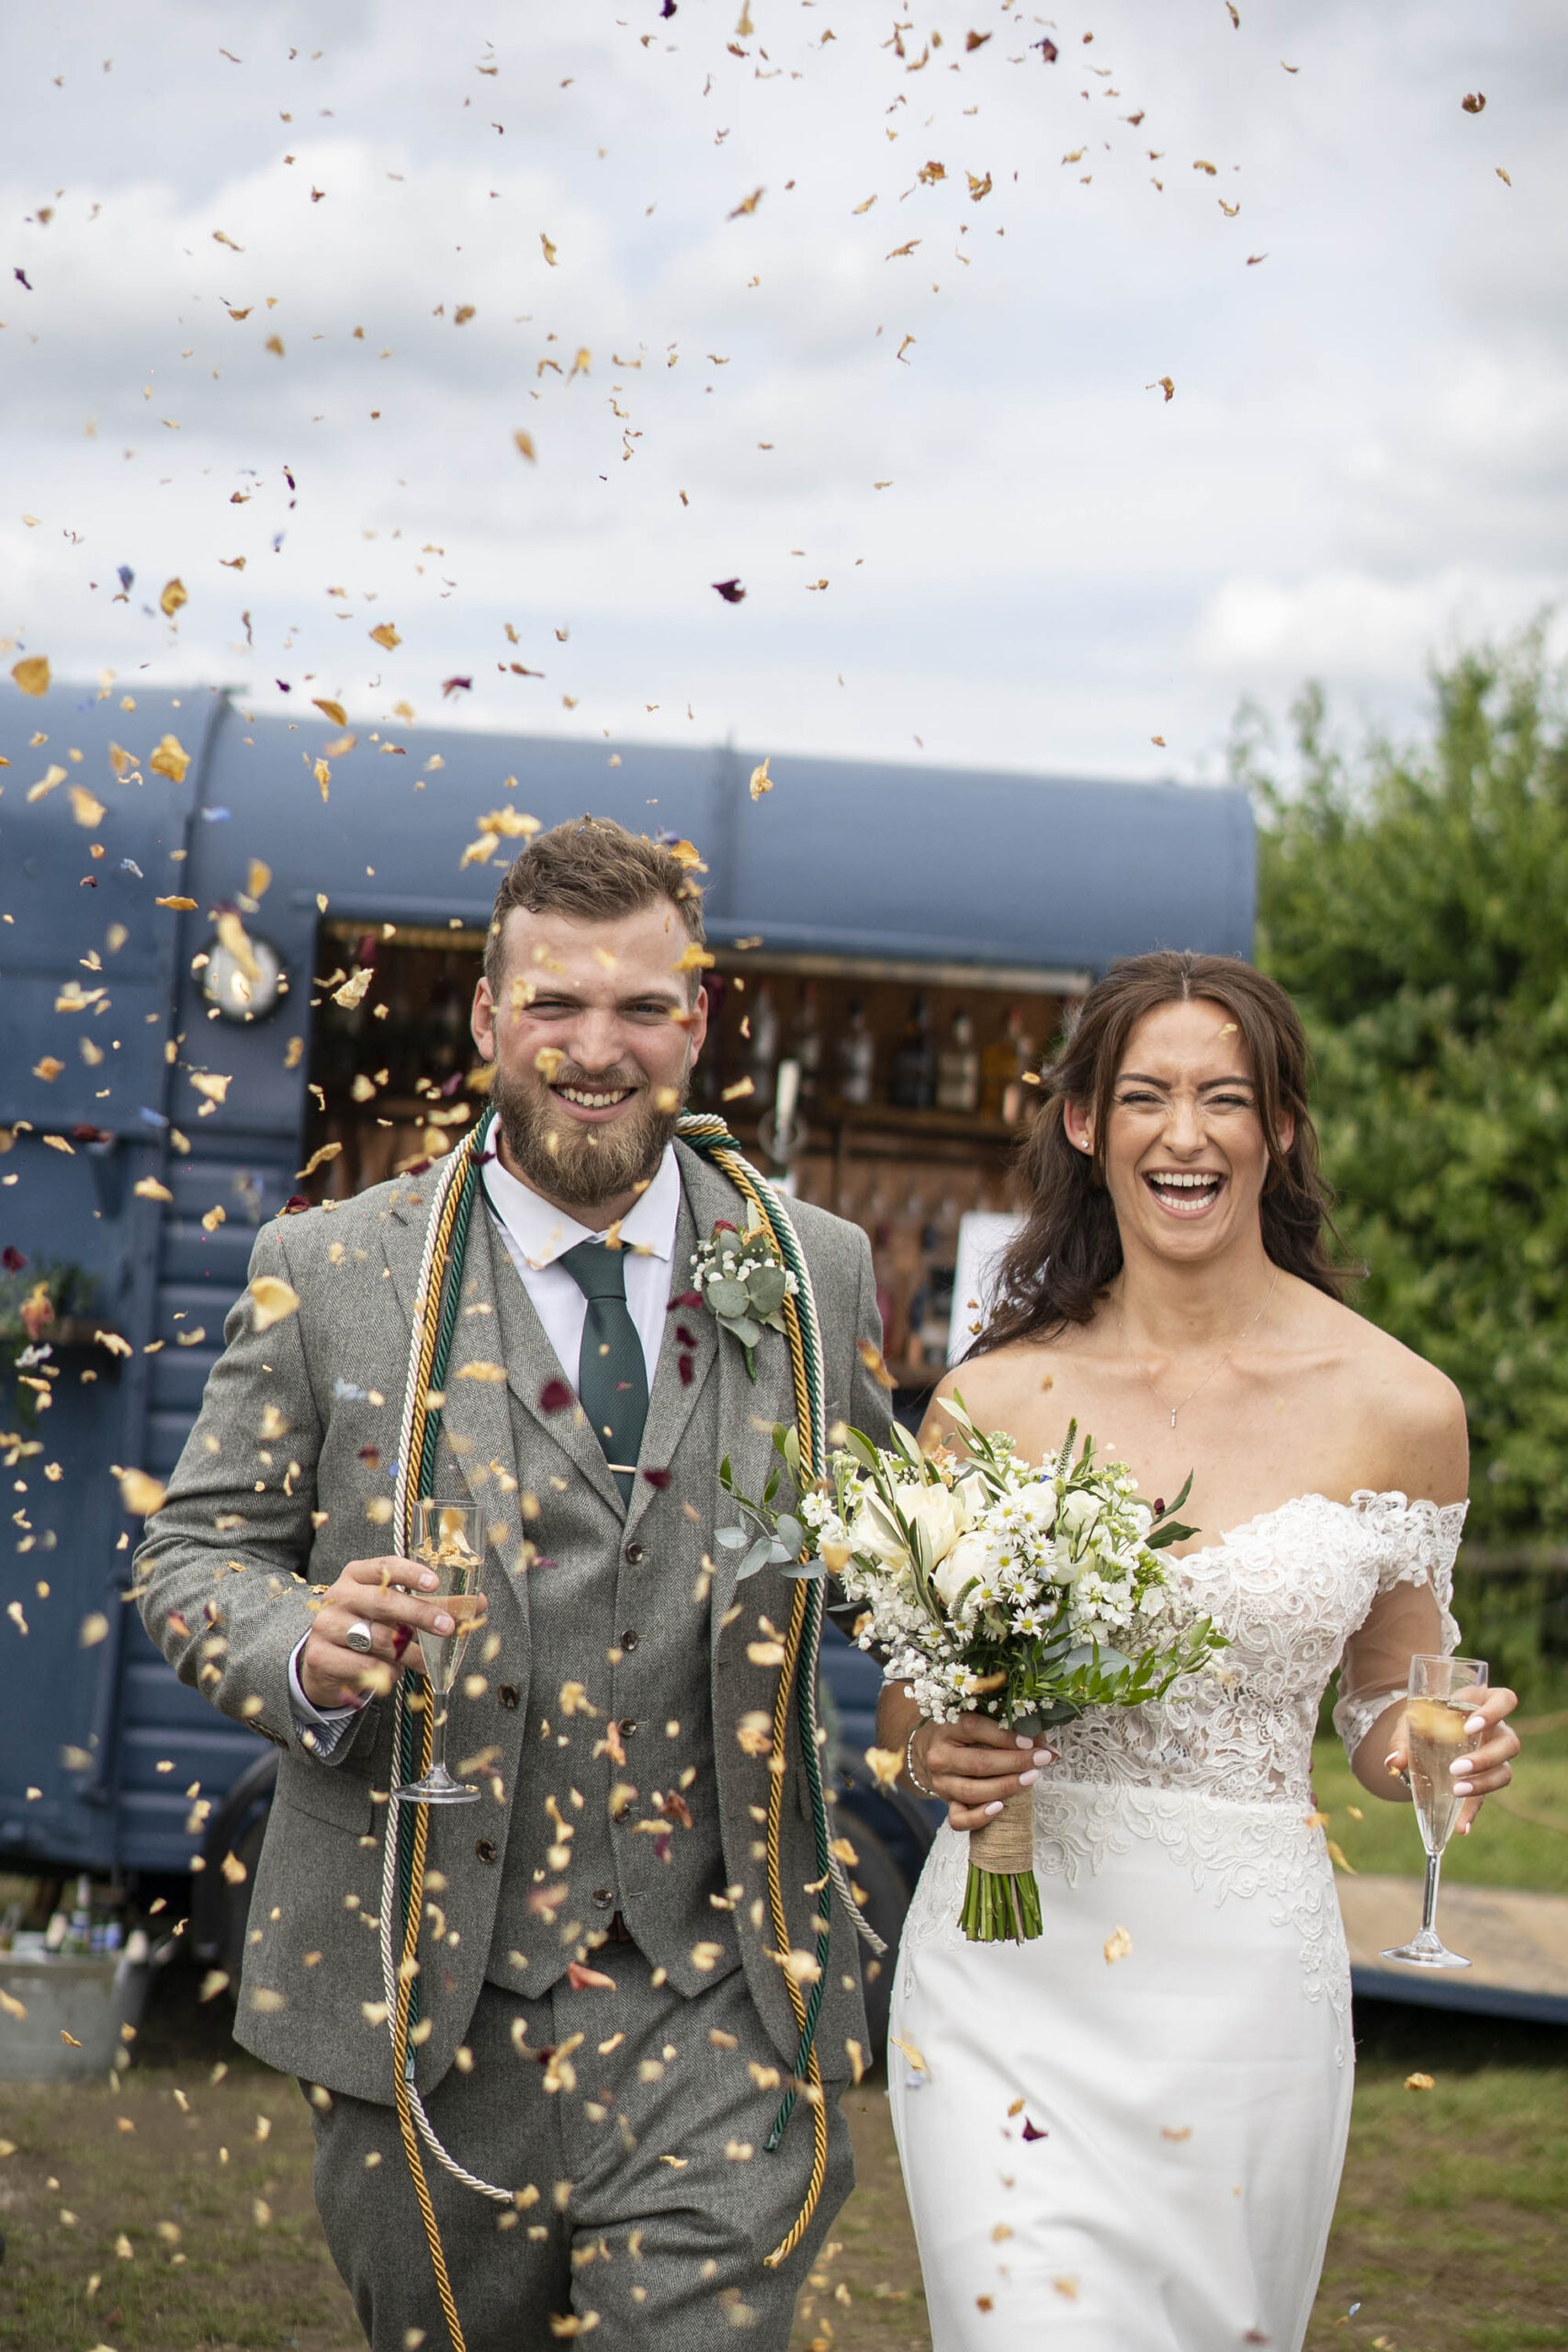 Groom and bride walking towards the camera through confetti - image by Jodie Cooling Photography